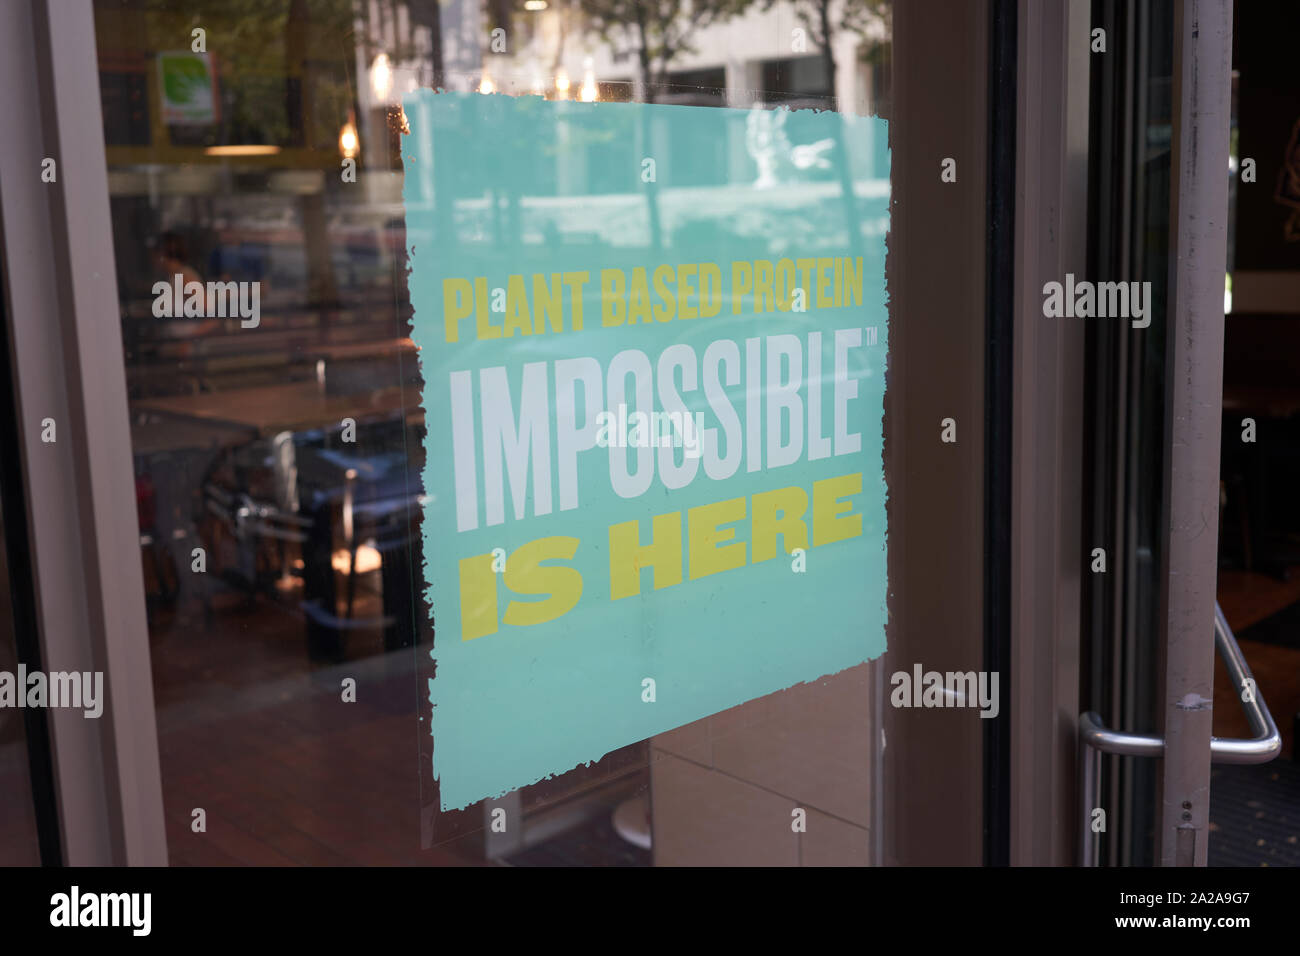 Portland, OR - Sep 6, 2019: A QDOBA Mexican Eats restaurant in downtown Portland advertises the availability of Impossible brand plant-based protein. Stock Photo